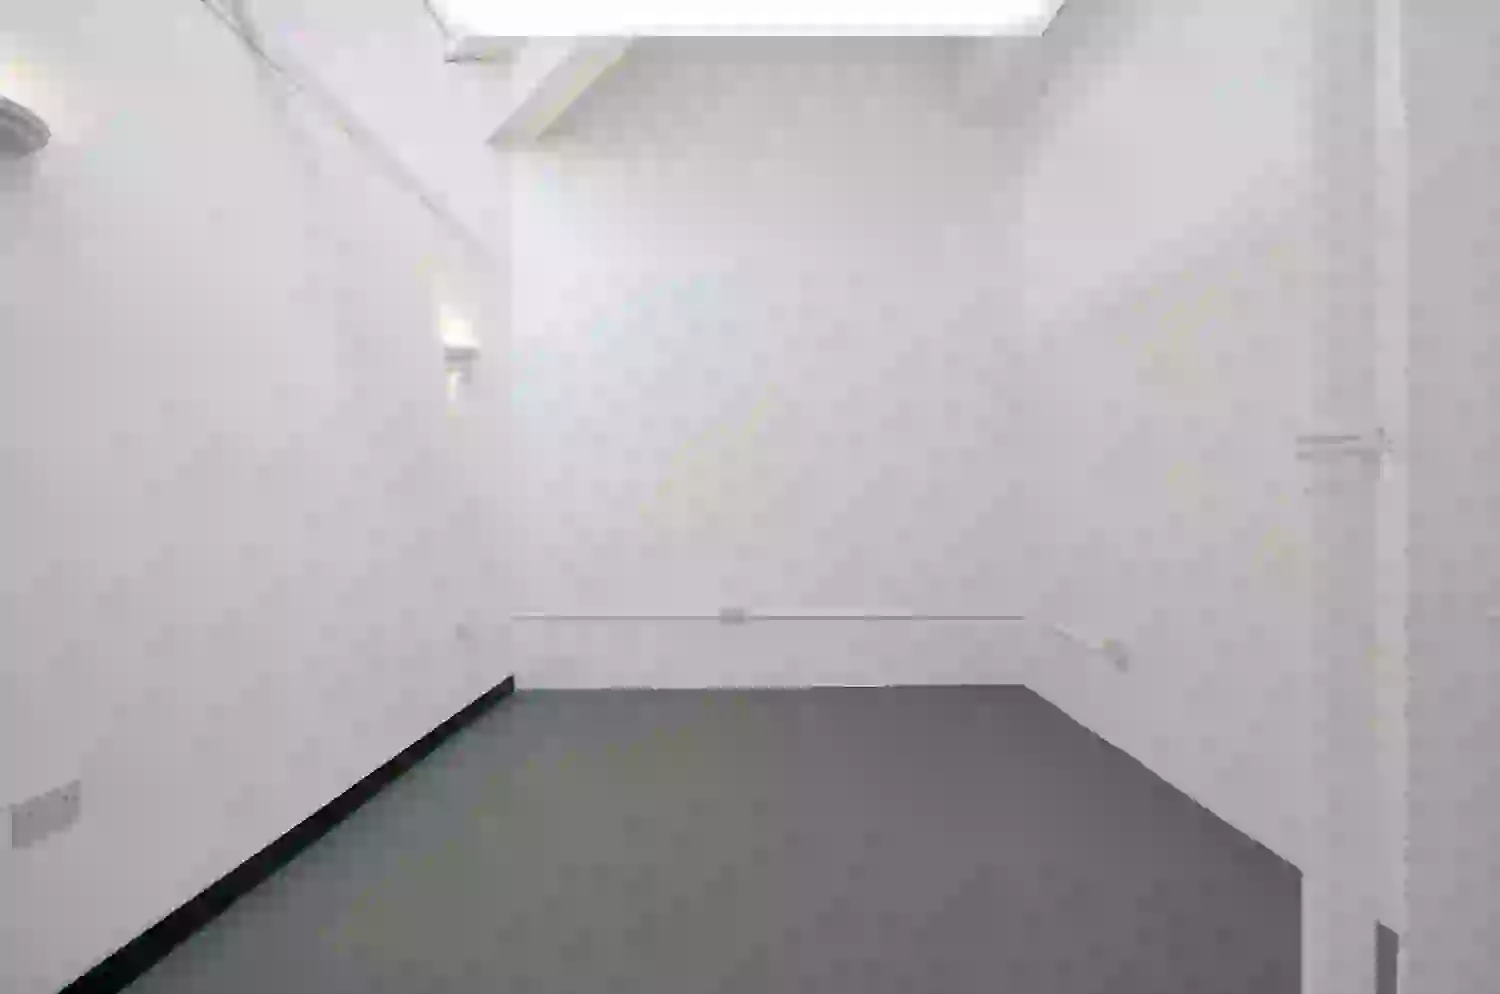 Office space to rent at The Chocolate Factory, Clarendon Road , Wood Green, London, unit WB.A201, 200 sq ft (18 sq m).